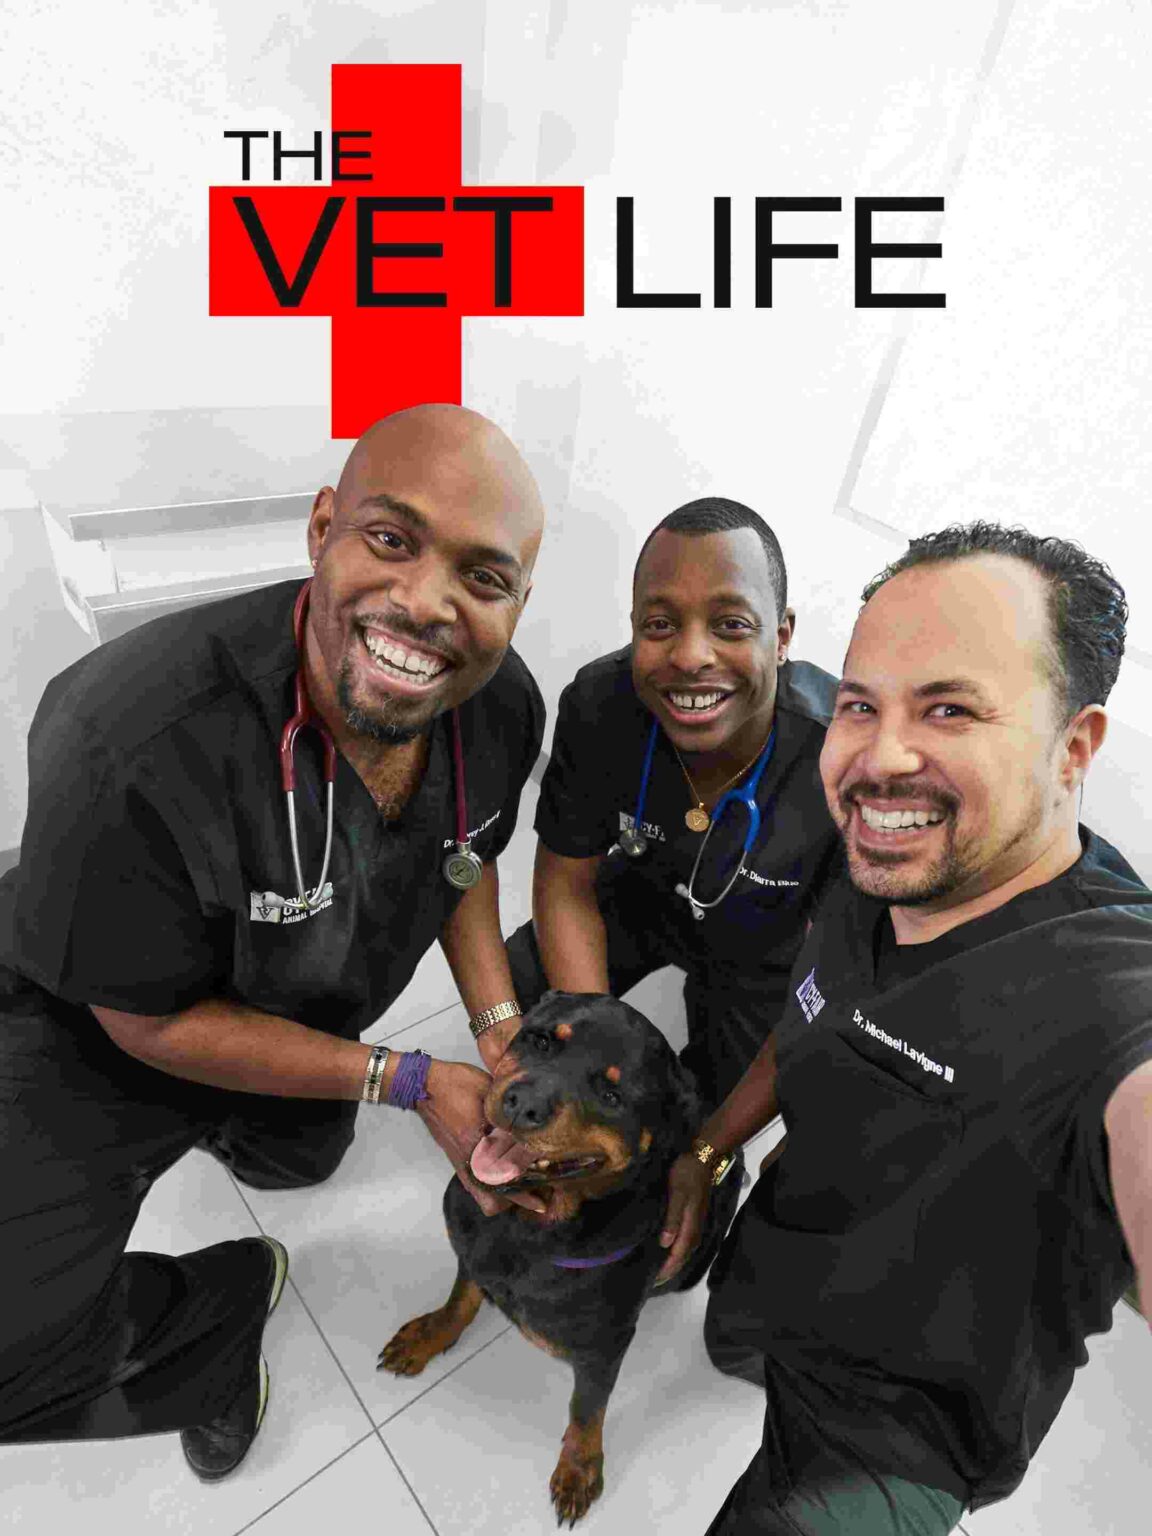 Vet Shows 11 Must Watch TV Shows for Pet Owners/Lovers Vetshows.